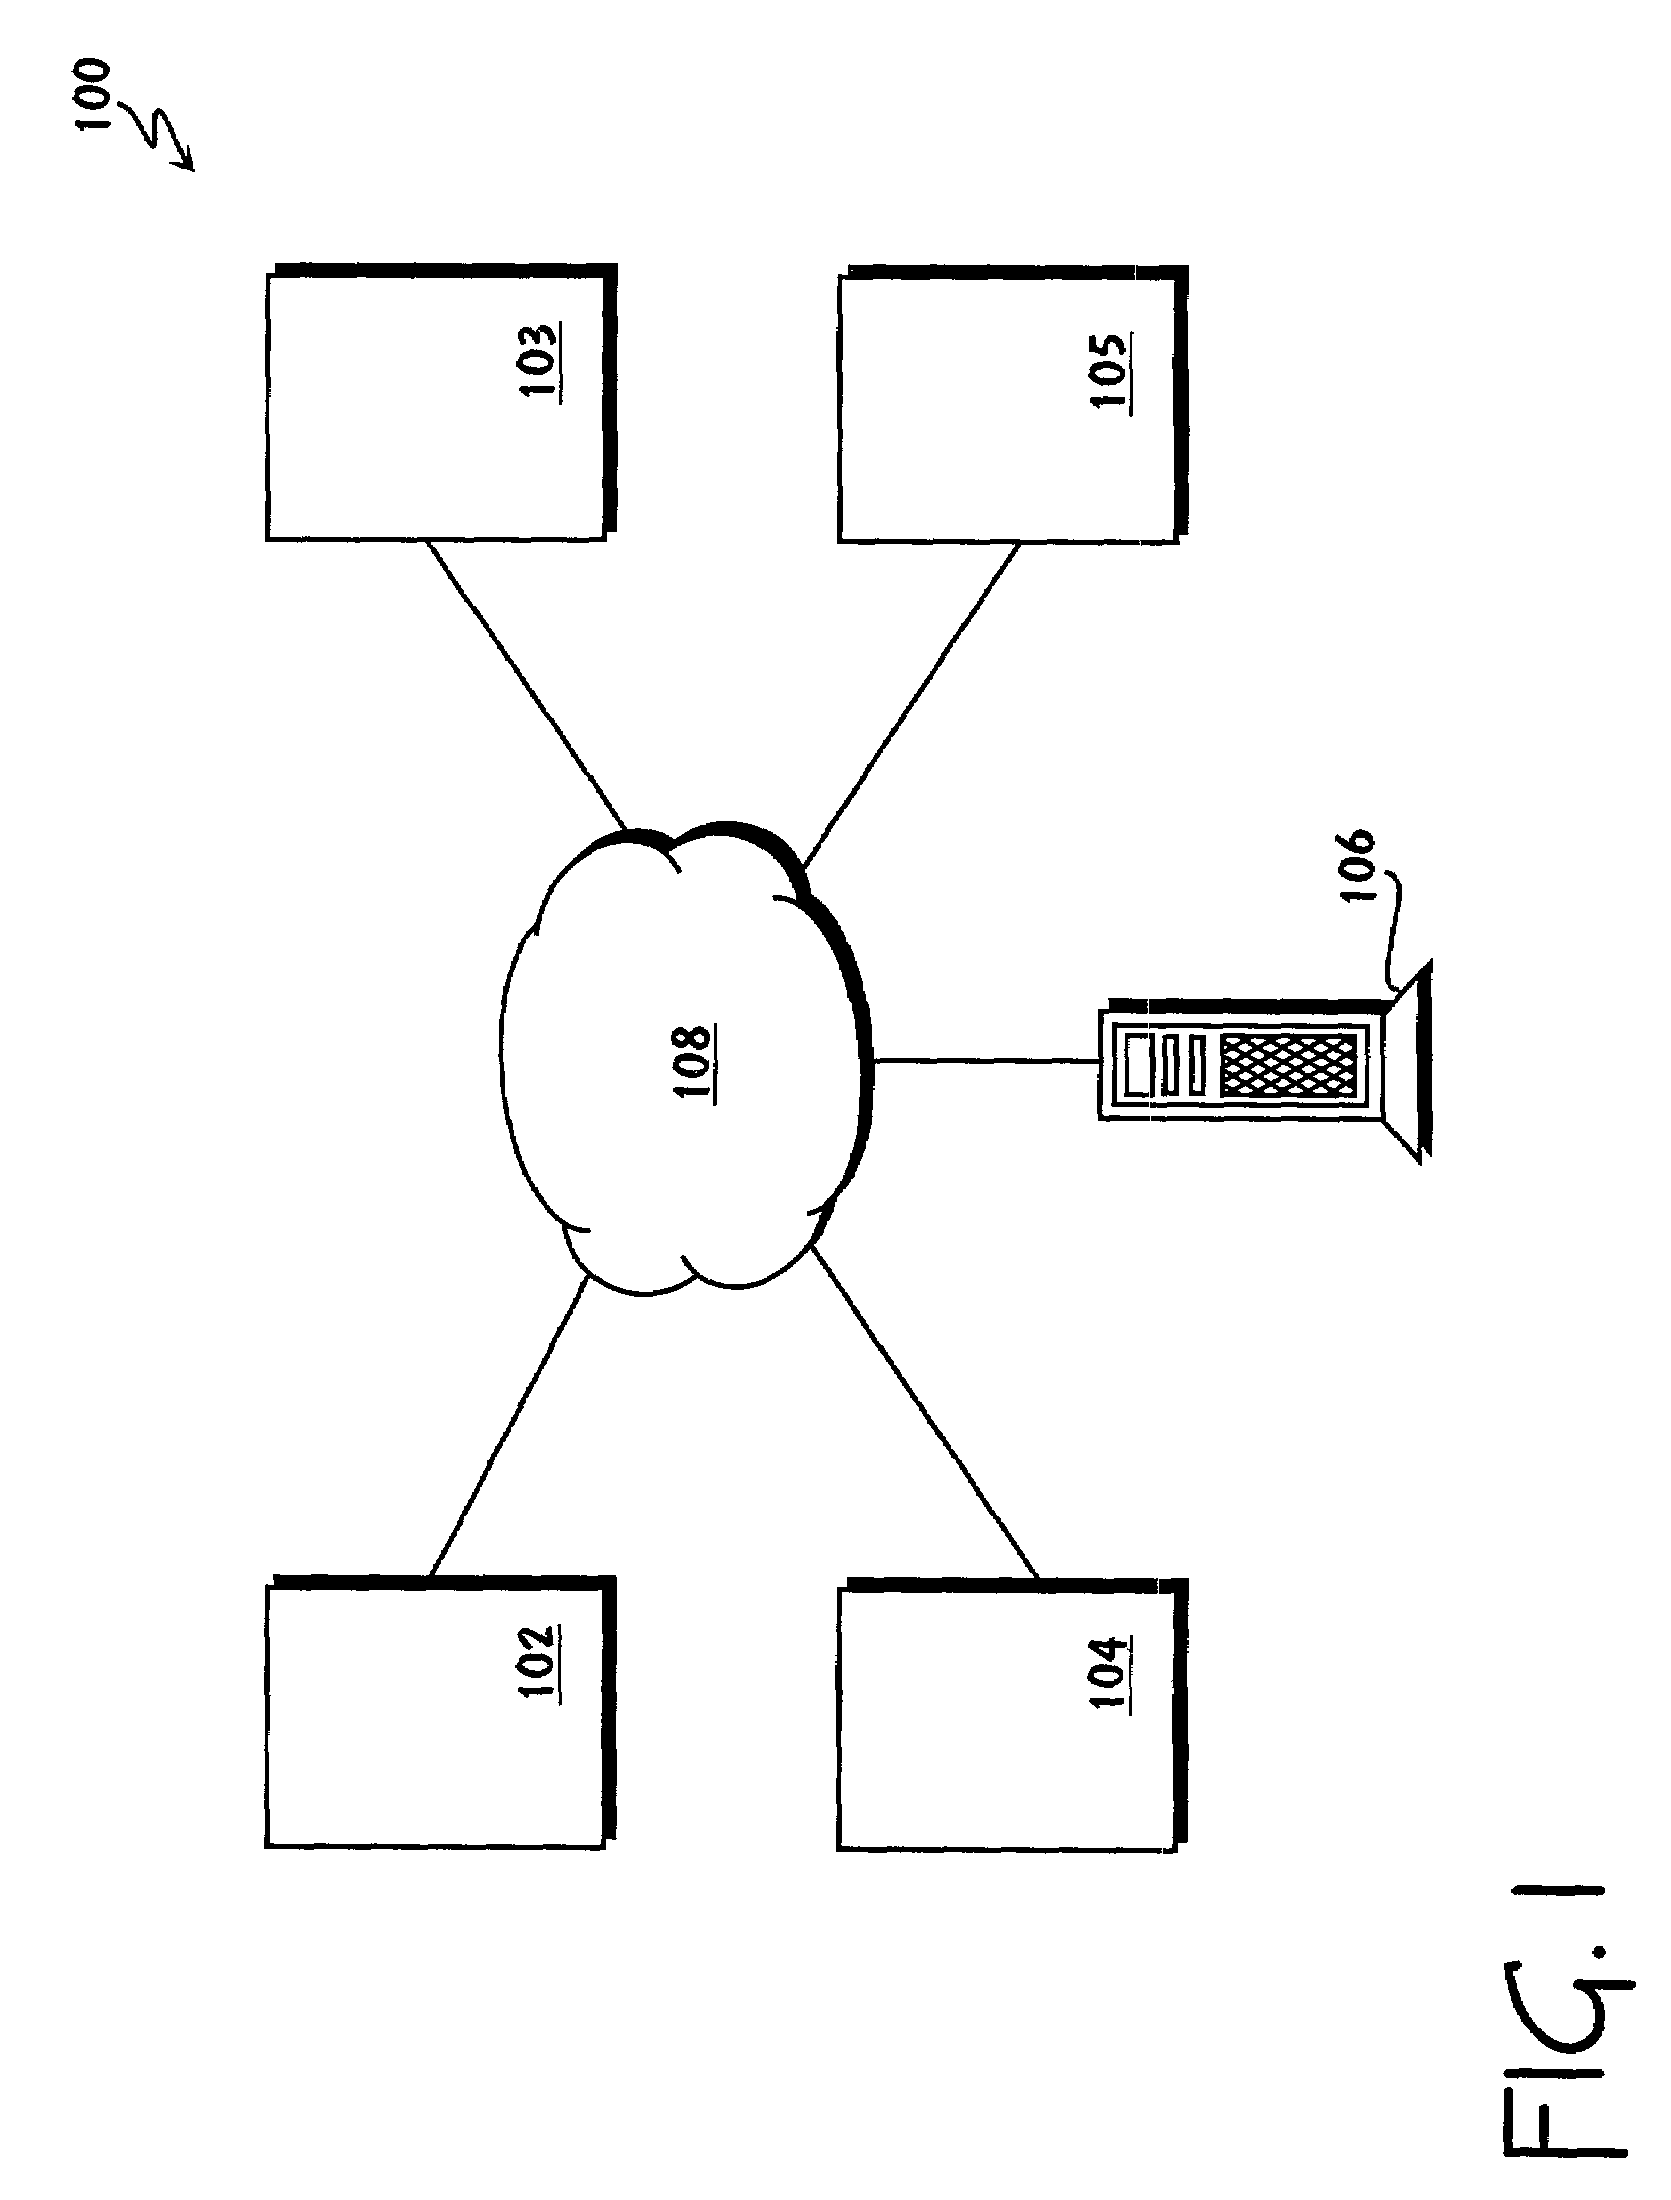 System and method for complex schedule generation